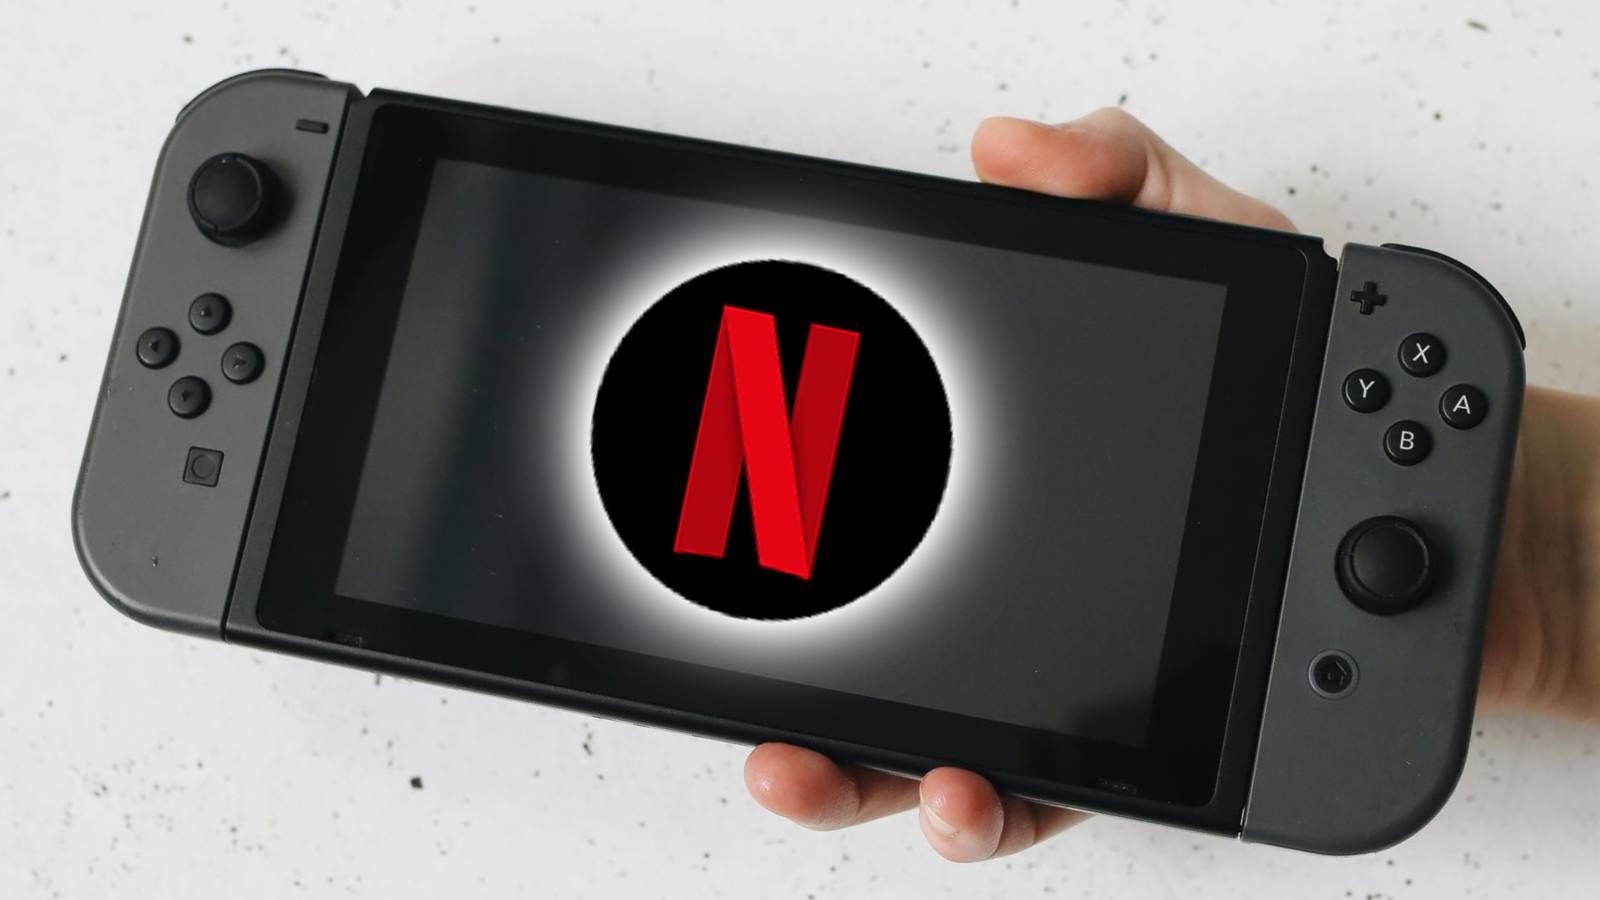 Image of the Nintendo Switch with the Netflix logo on the display.